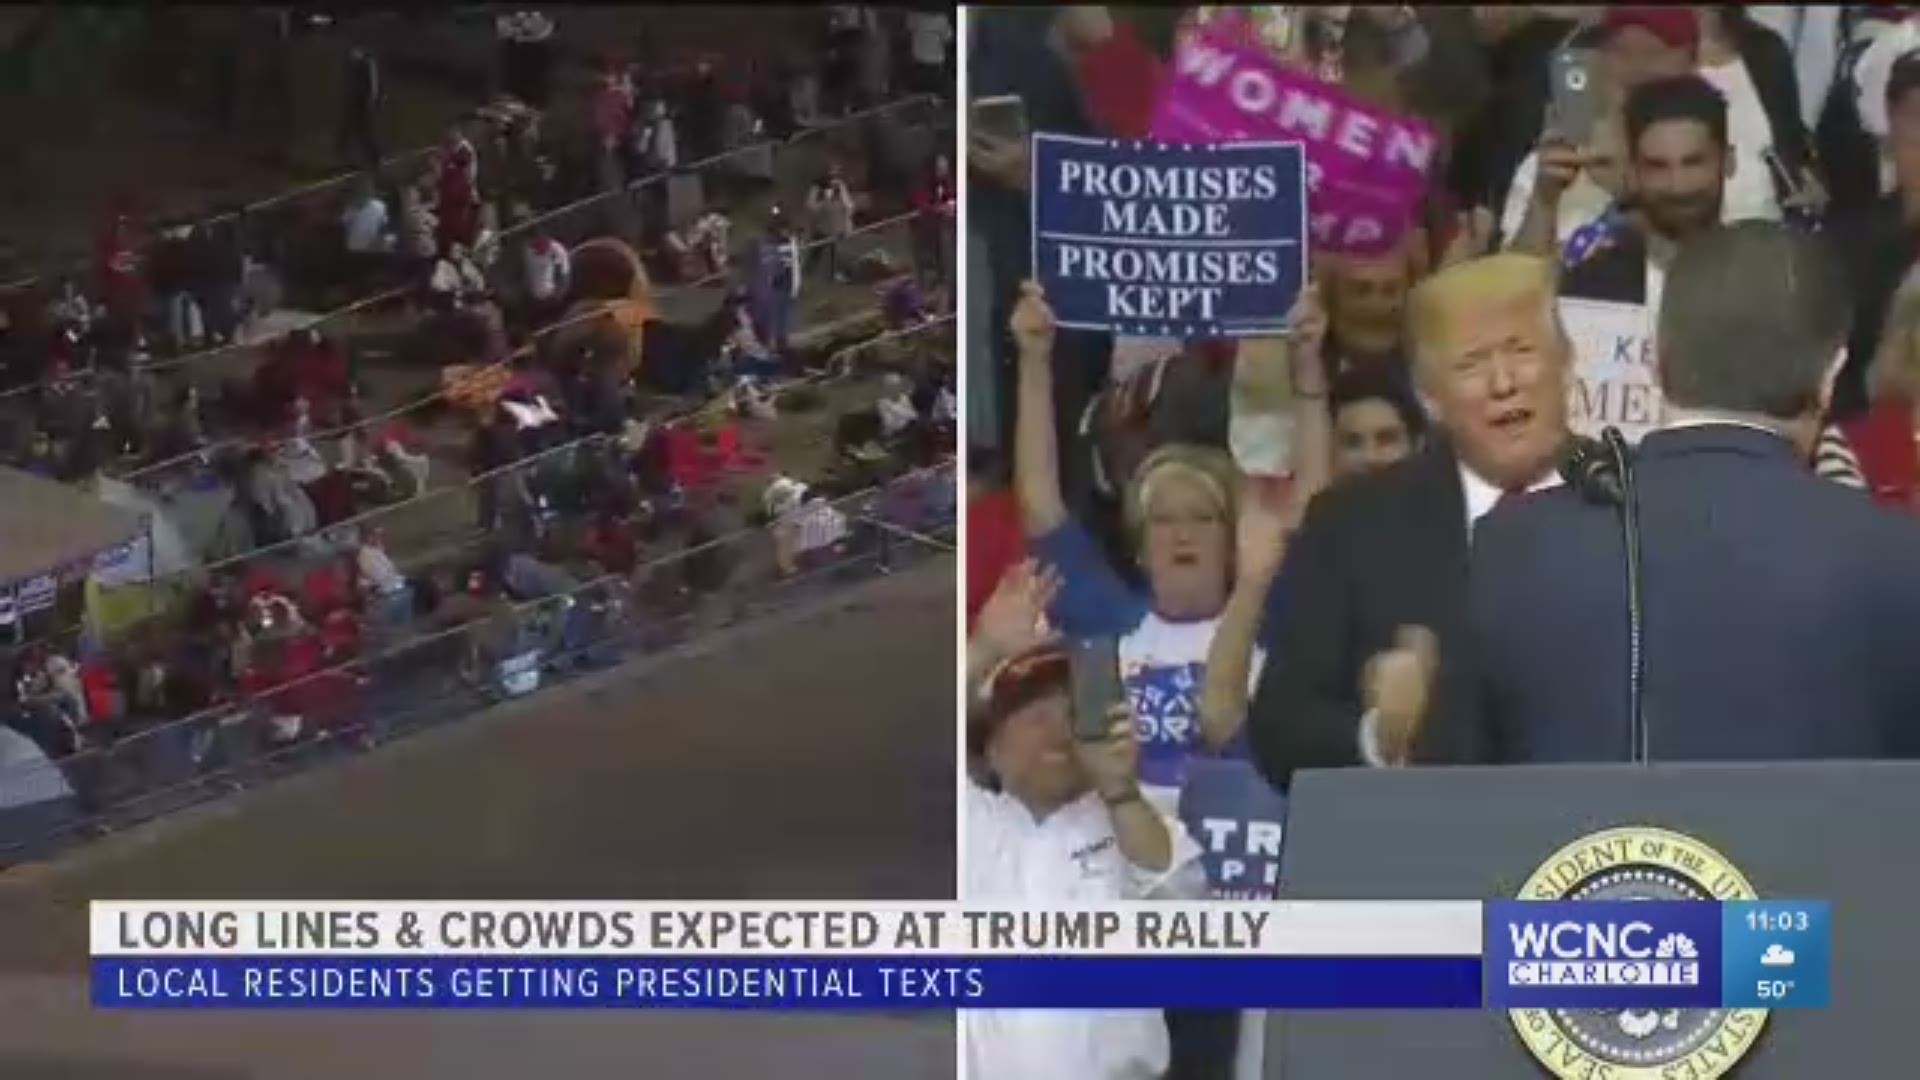 The president had his first rally stop in Houston on Monday night. Campaign managers said more than 100,000 people tried to attend.